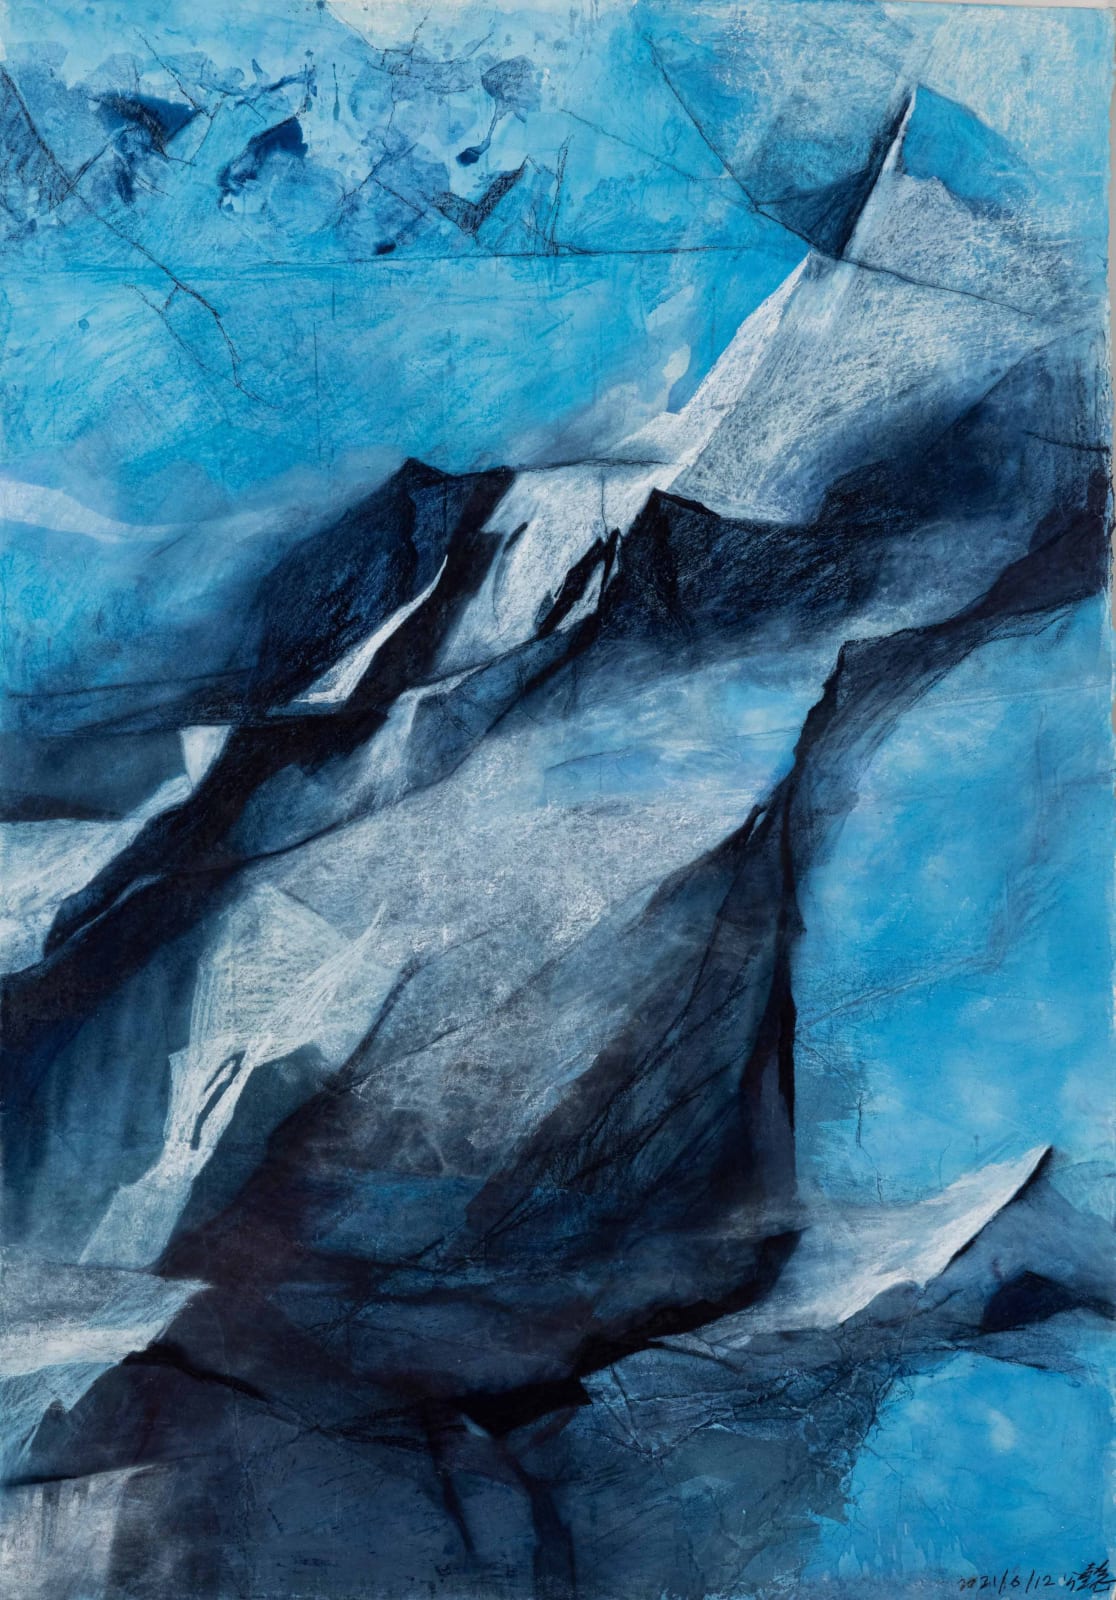 Blue Sierra Watercolor, Gouache, Pastel and Mineral Pigment on Suzhou Pi Xuan Paper 211 x 148 cm, 2021